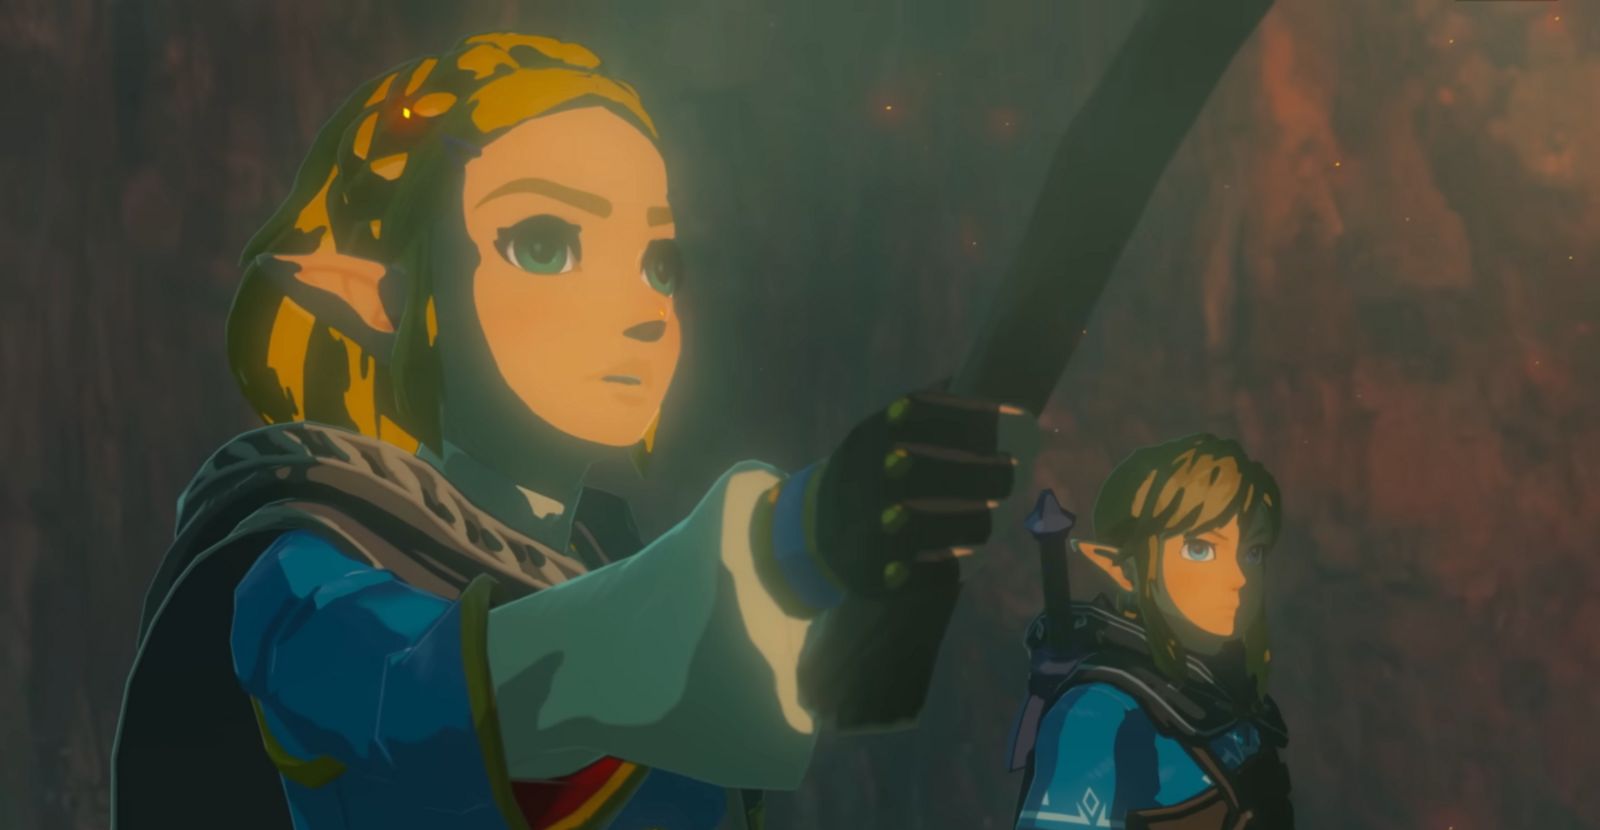 Image of Link and Zelda holding a torch in a cave.